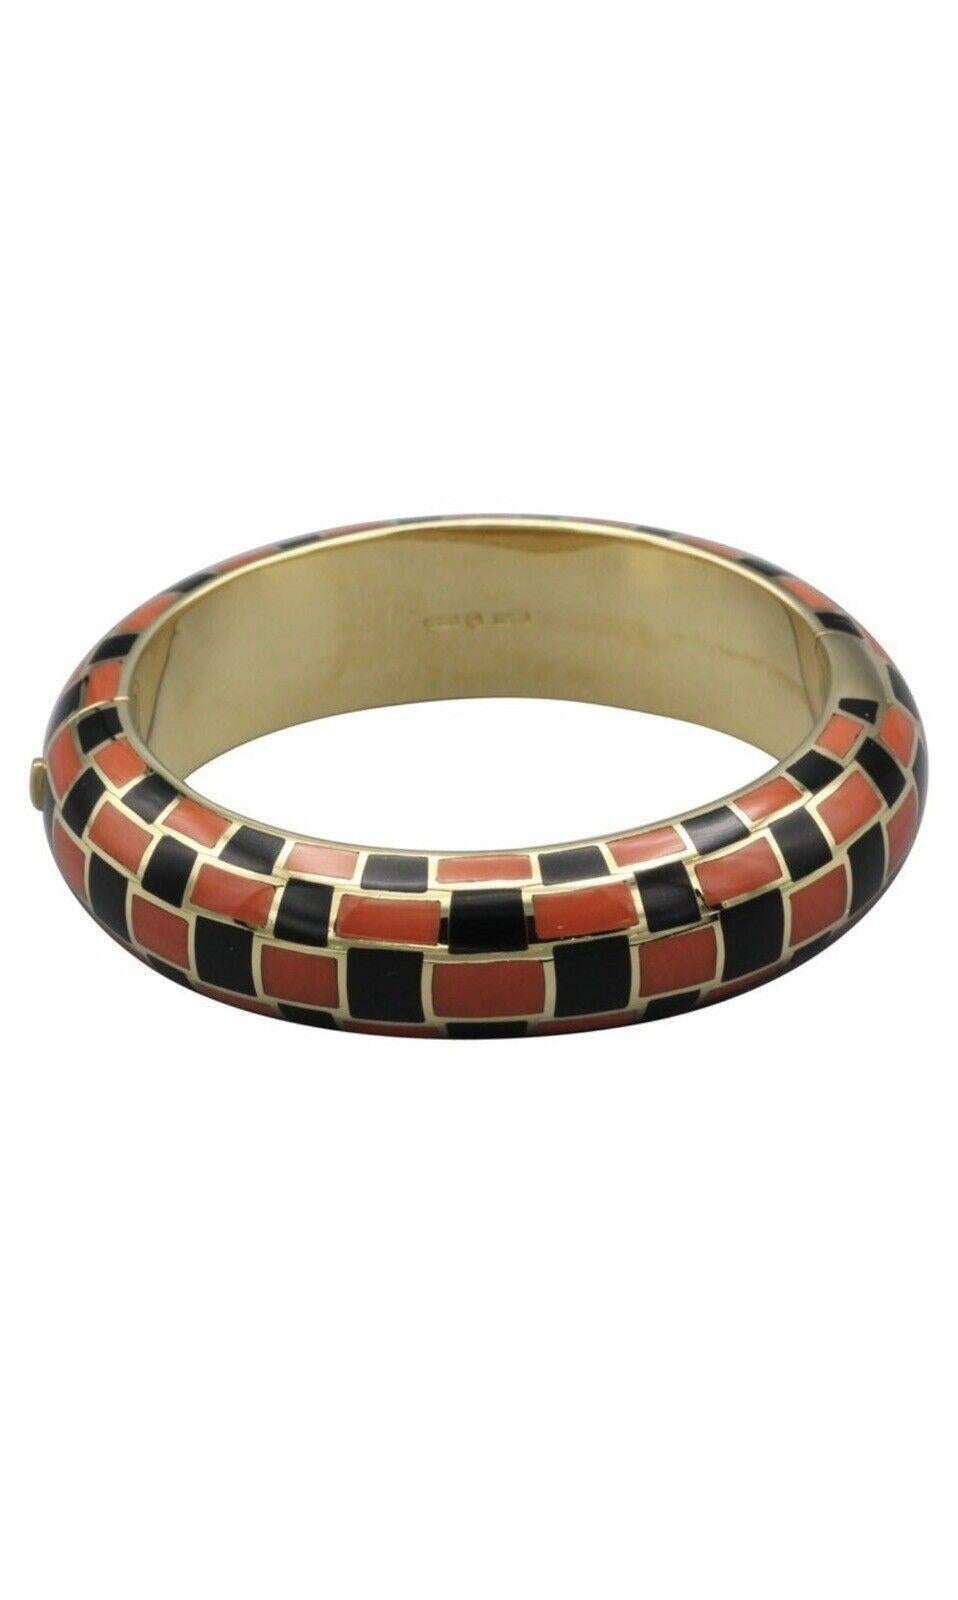 Women's or Men's TIFFANY & CO. ANGELA CUMMINGS 18k Yellow Gold, Coral & Black Jade Inlay Bangle For Sale